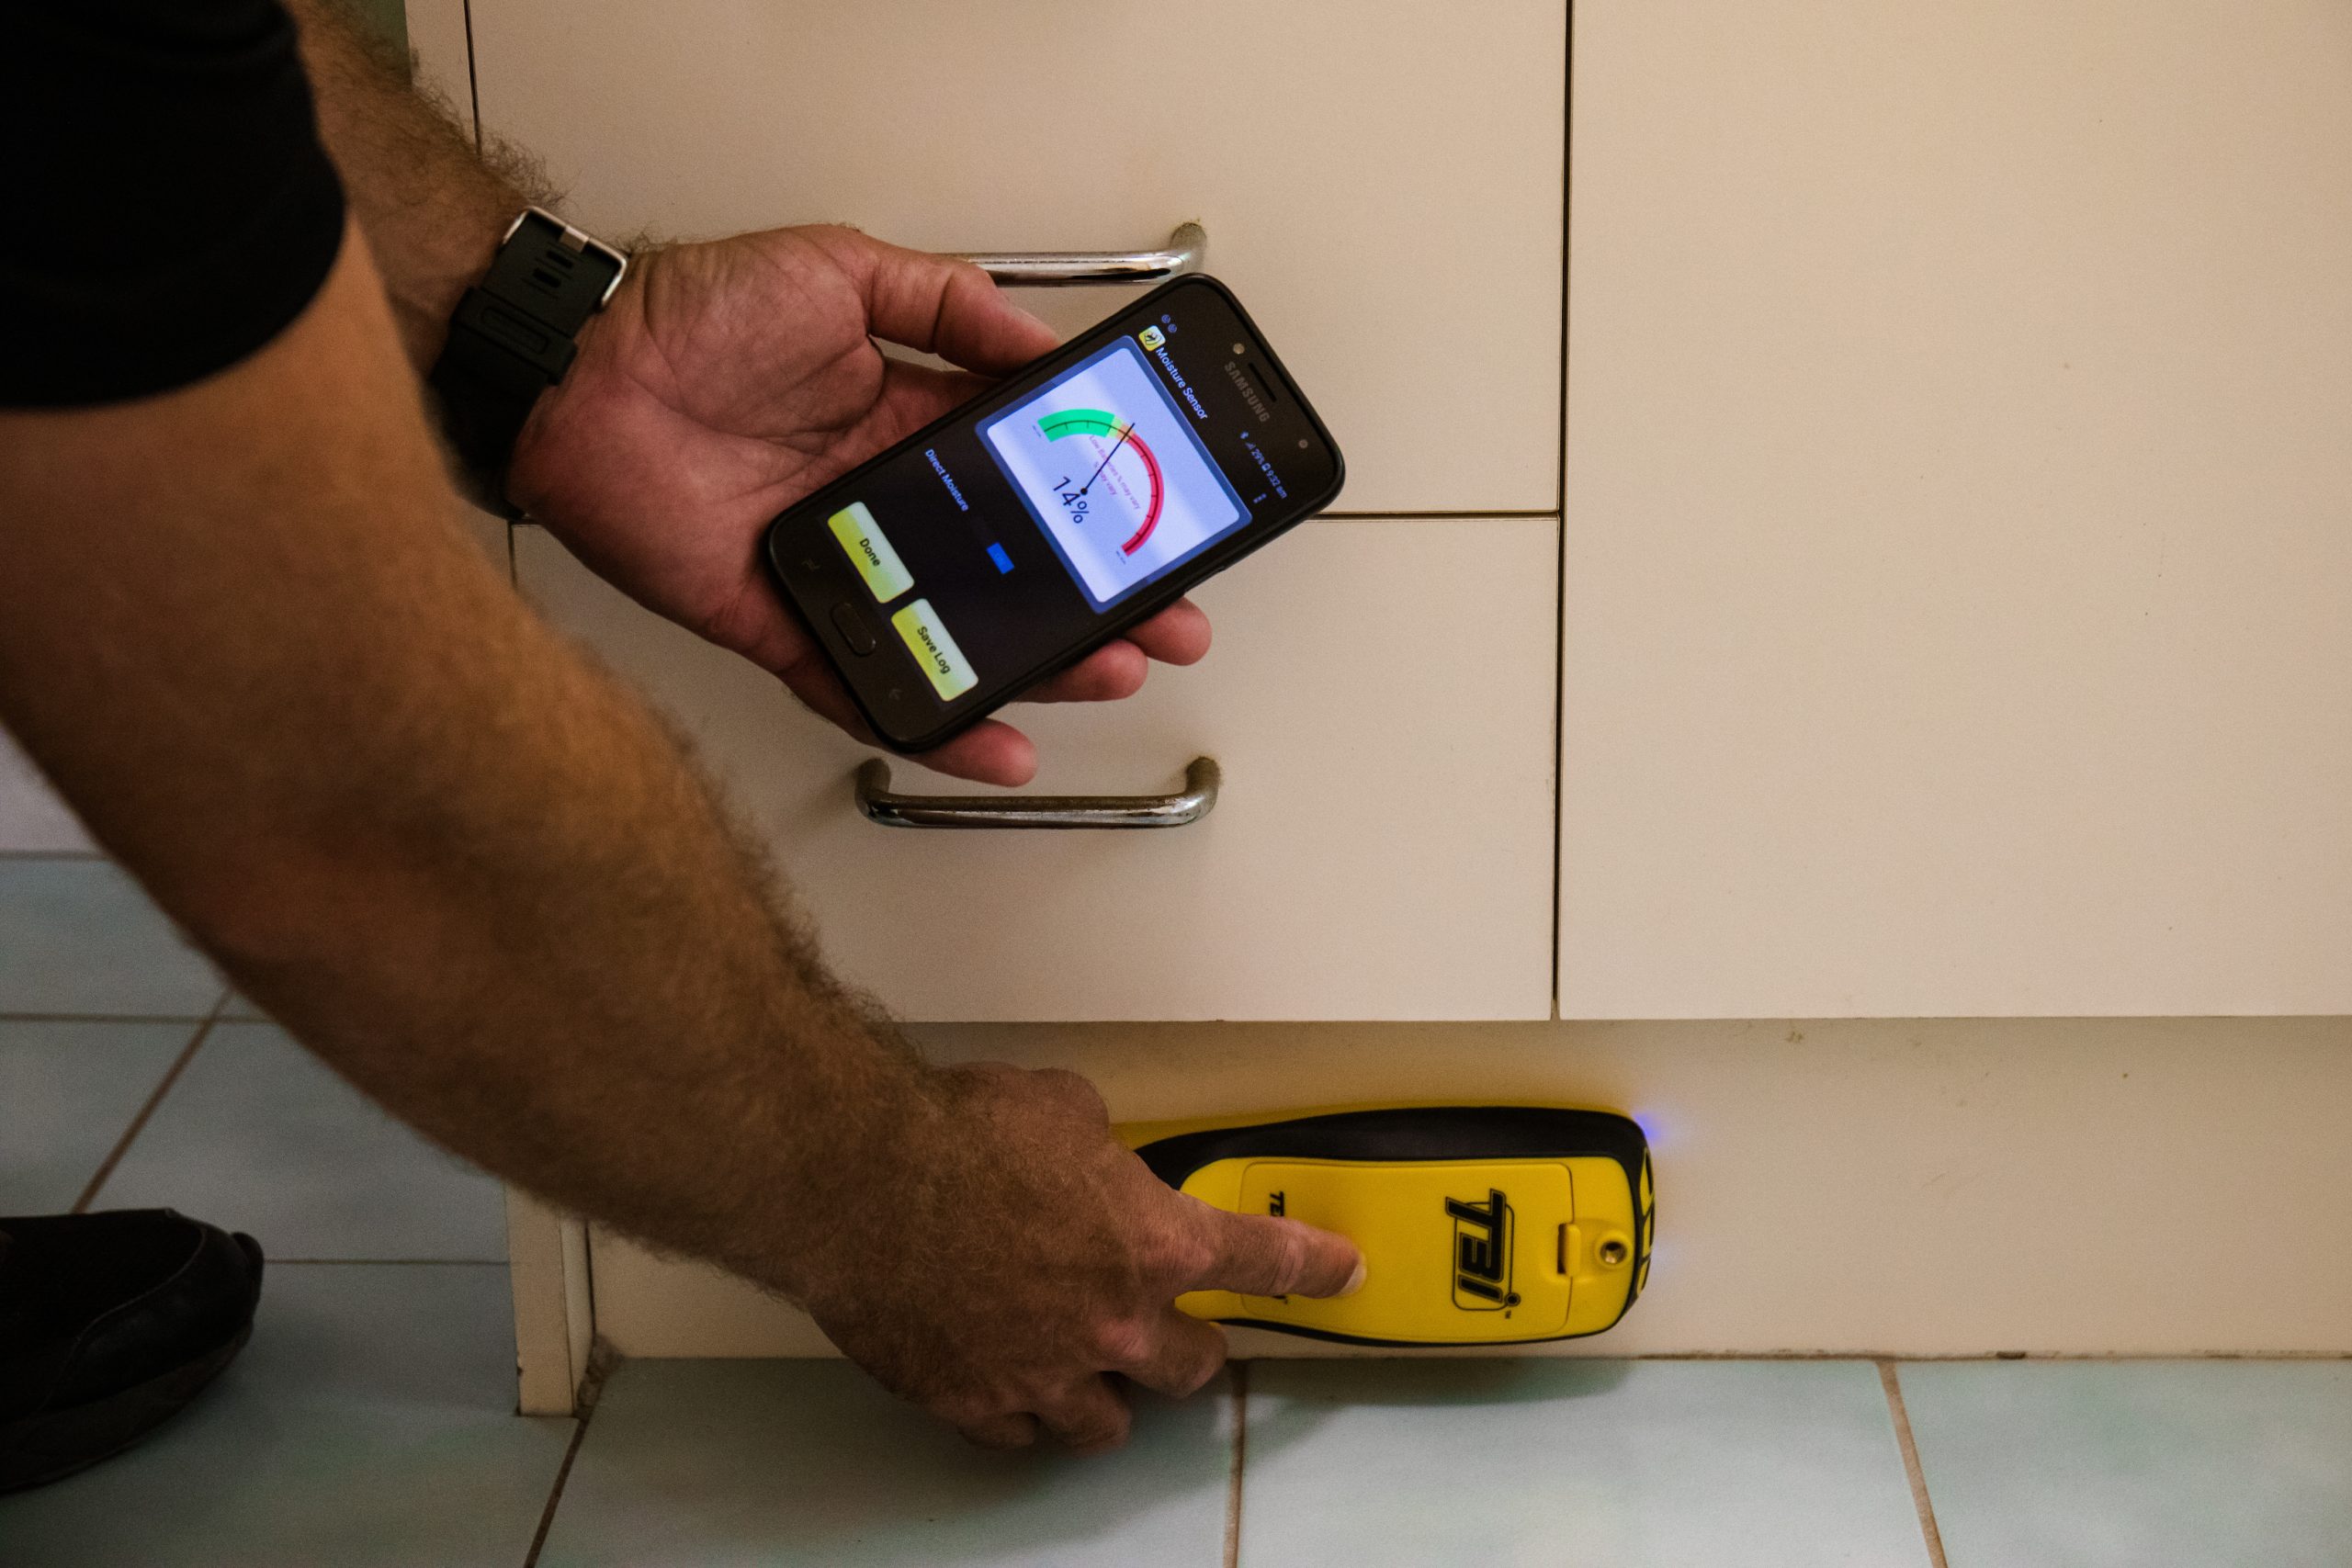 Qualified building inspector using device to measure moisture levels and identify potential termite risk areas